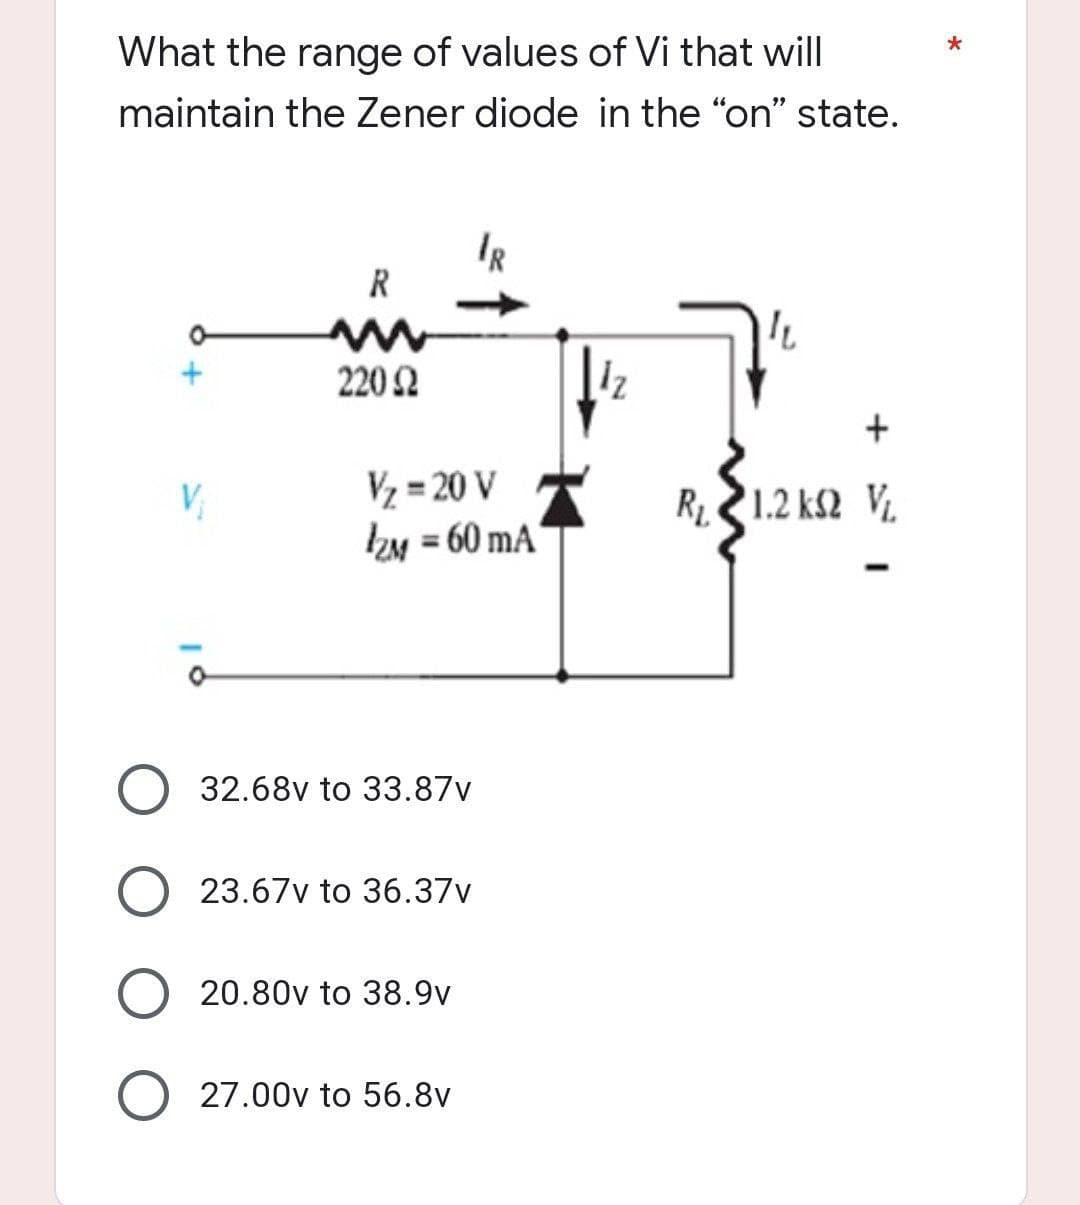 *
What the range of values of Vi that will
maintain the Zener diode in the "on" state.
IR
R
www
"L
220 Ω
+
R, 21.2 ΚΩ V
V₁
V₂=20 V
IZM = 60 mA
32.68v to 33.87v
23.67v to 36.37v
O 20.80v to 38.9v
O 27.00v to 56.8v